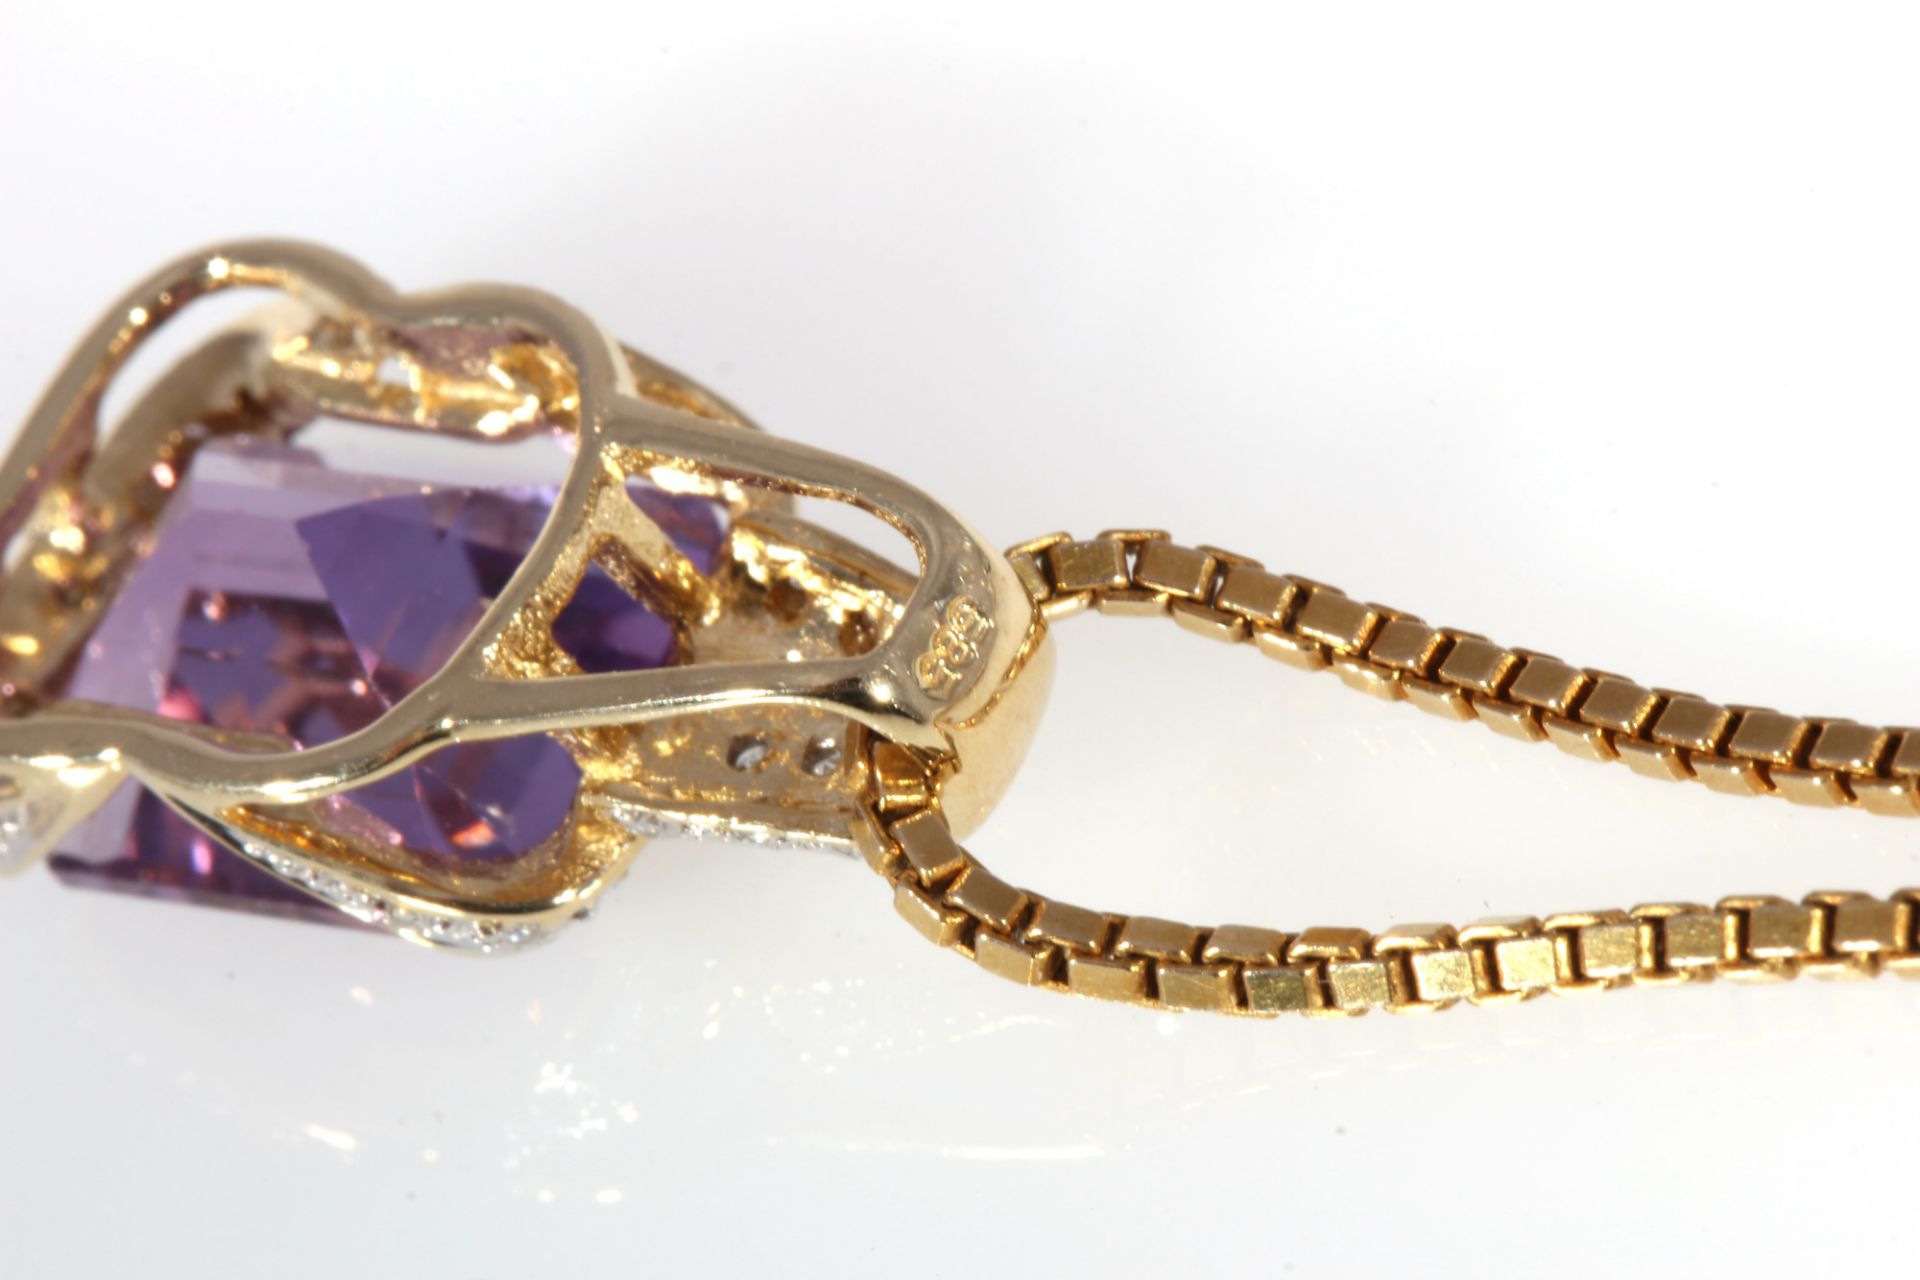 585 gold amethyst pendant with diamonds and 585 gold chain, 14K Gold Anhänger Amethyst mit Brillante - Image 5 of 6